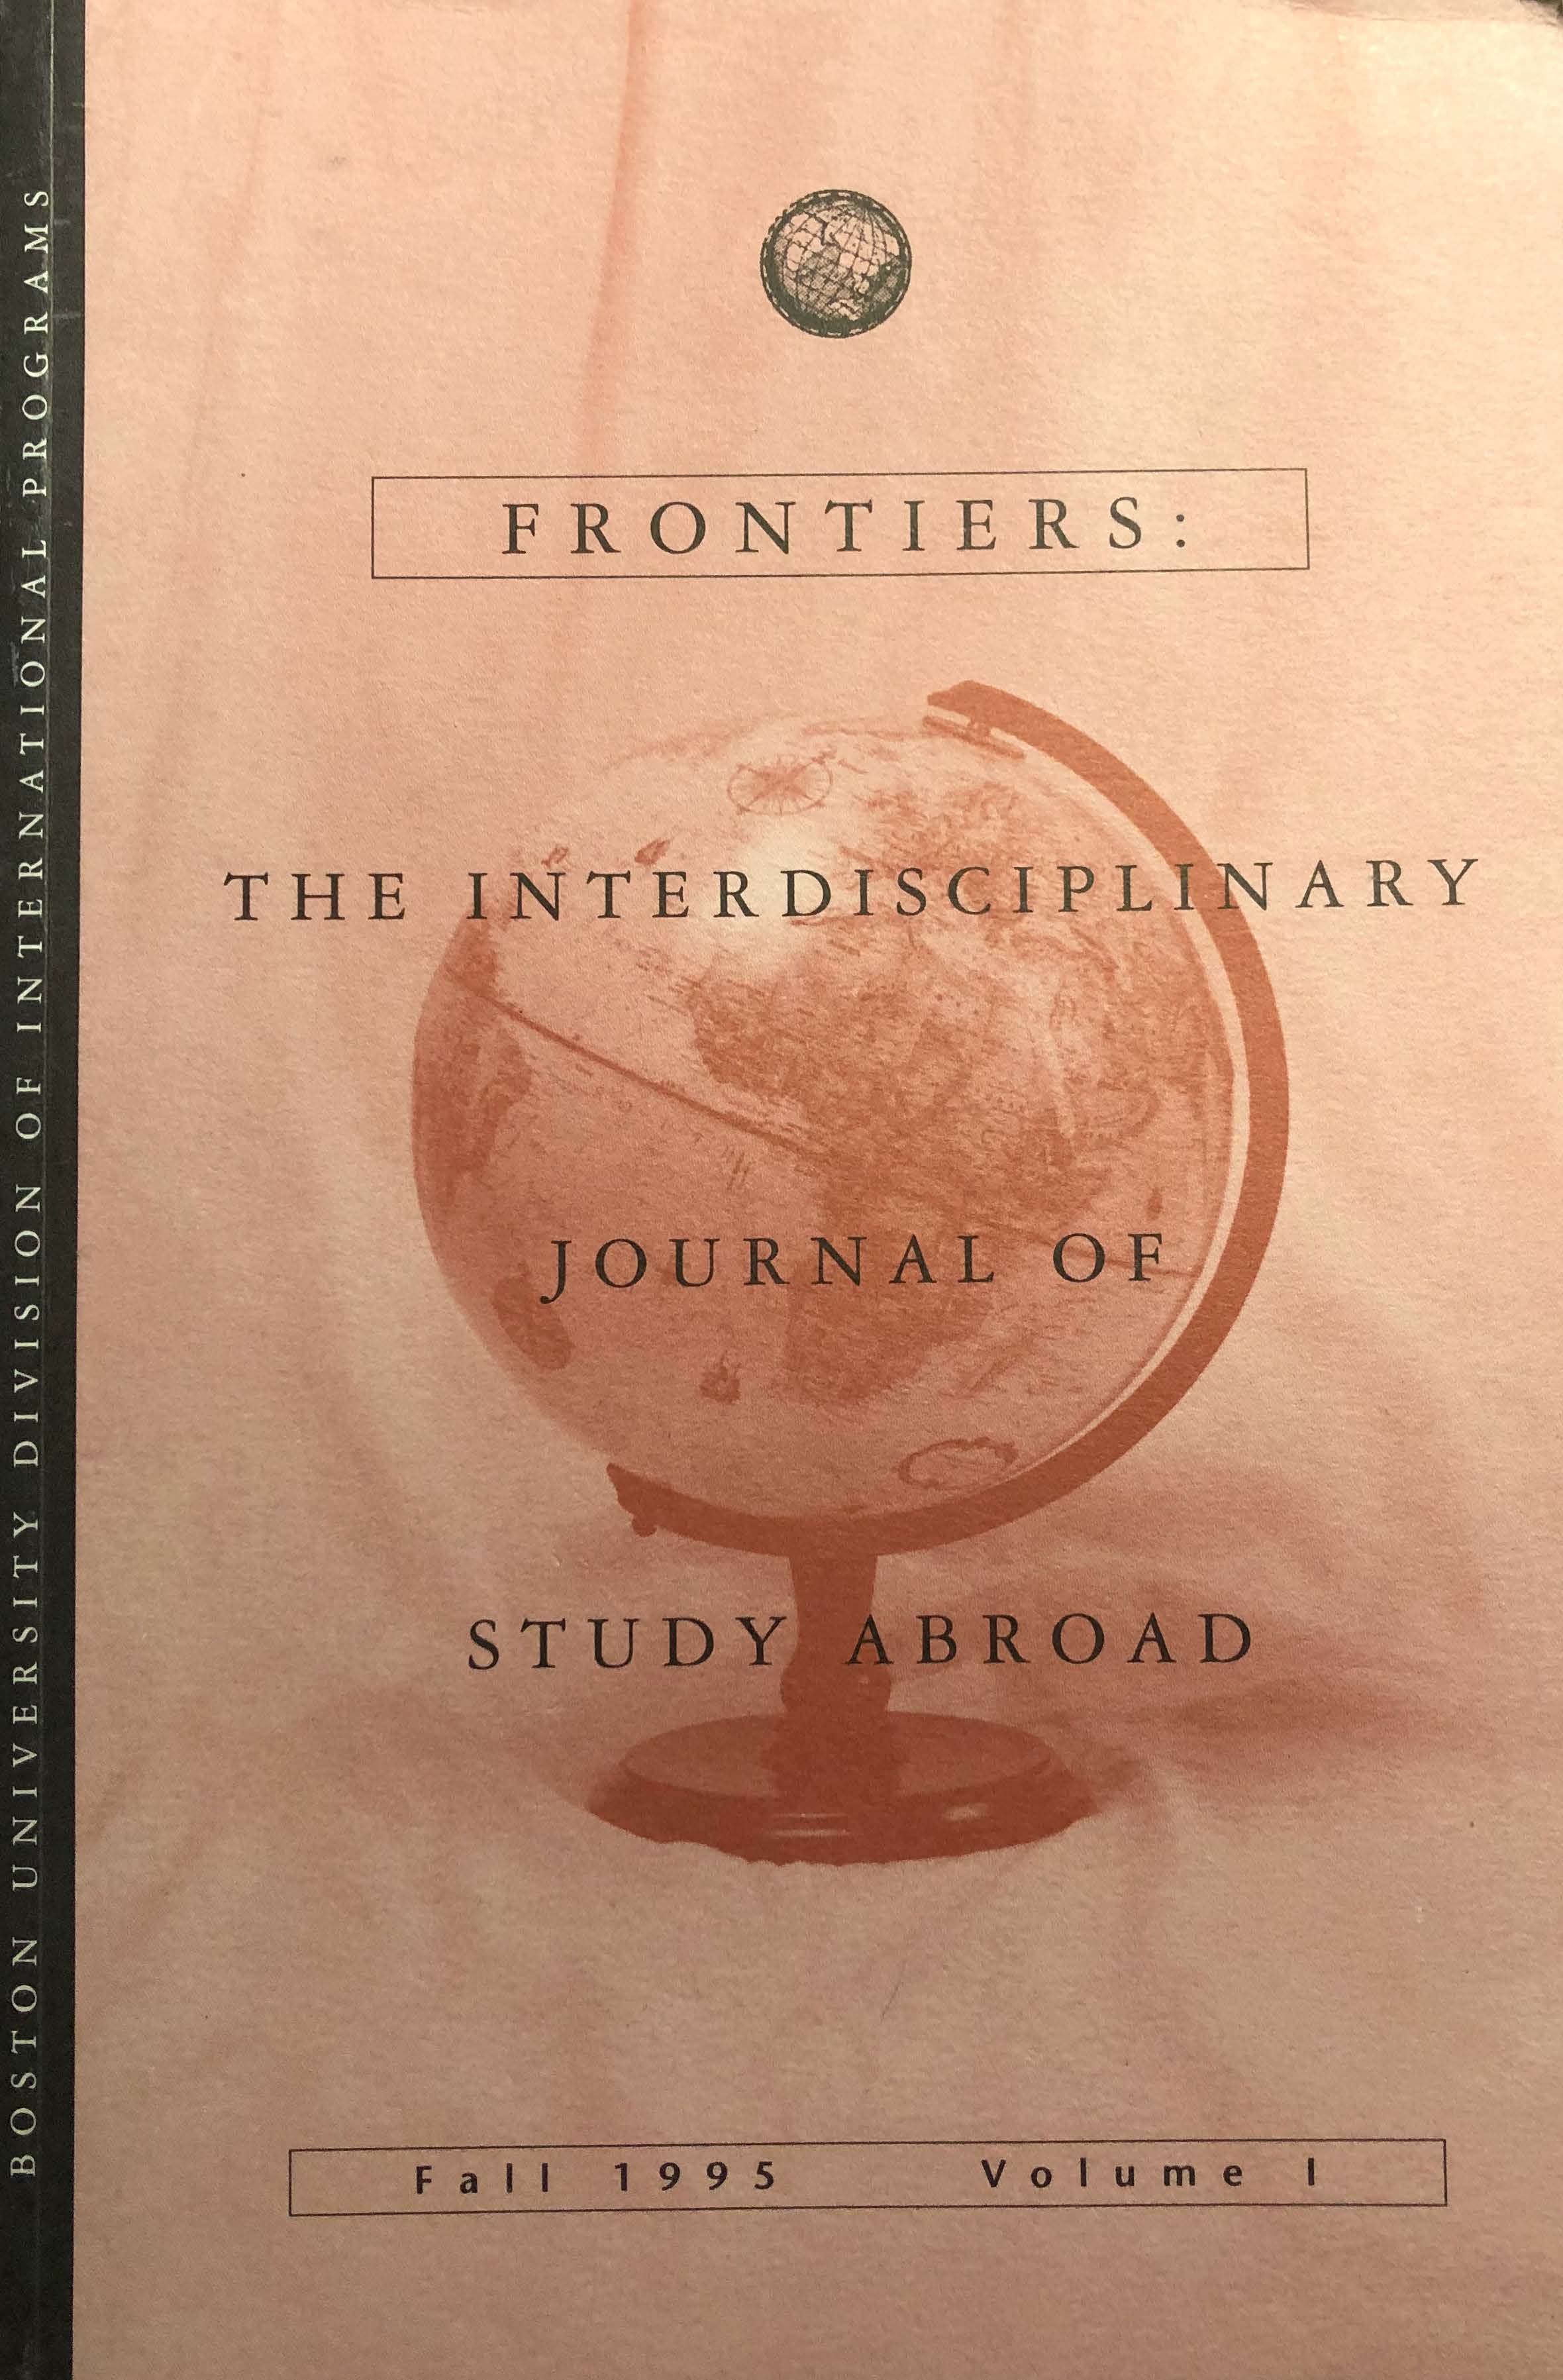 Red cover featuring an image of a globe in the background with the title of the journal and volume number printed across the center, along the left edge is printed "Boston University Division of International Programs"